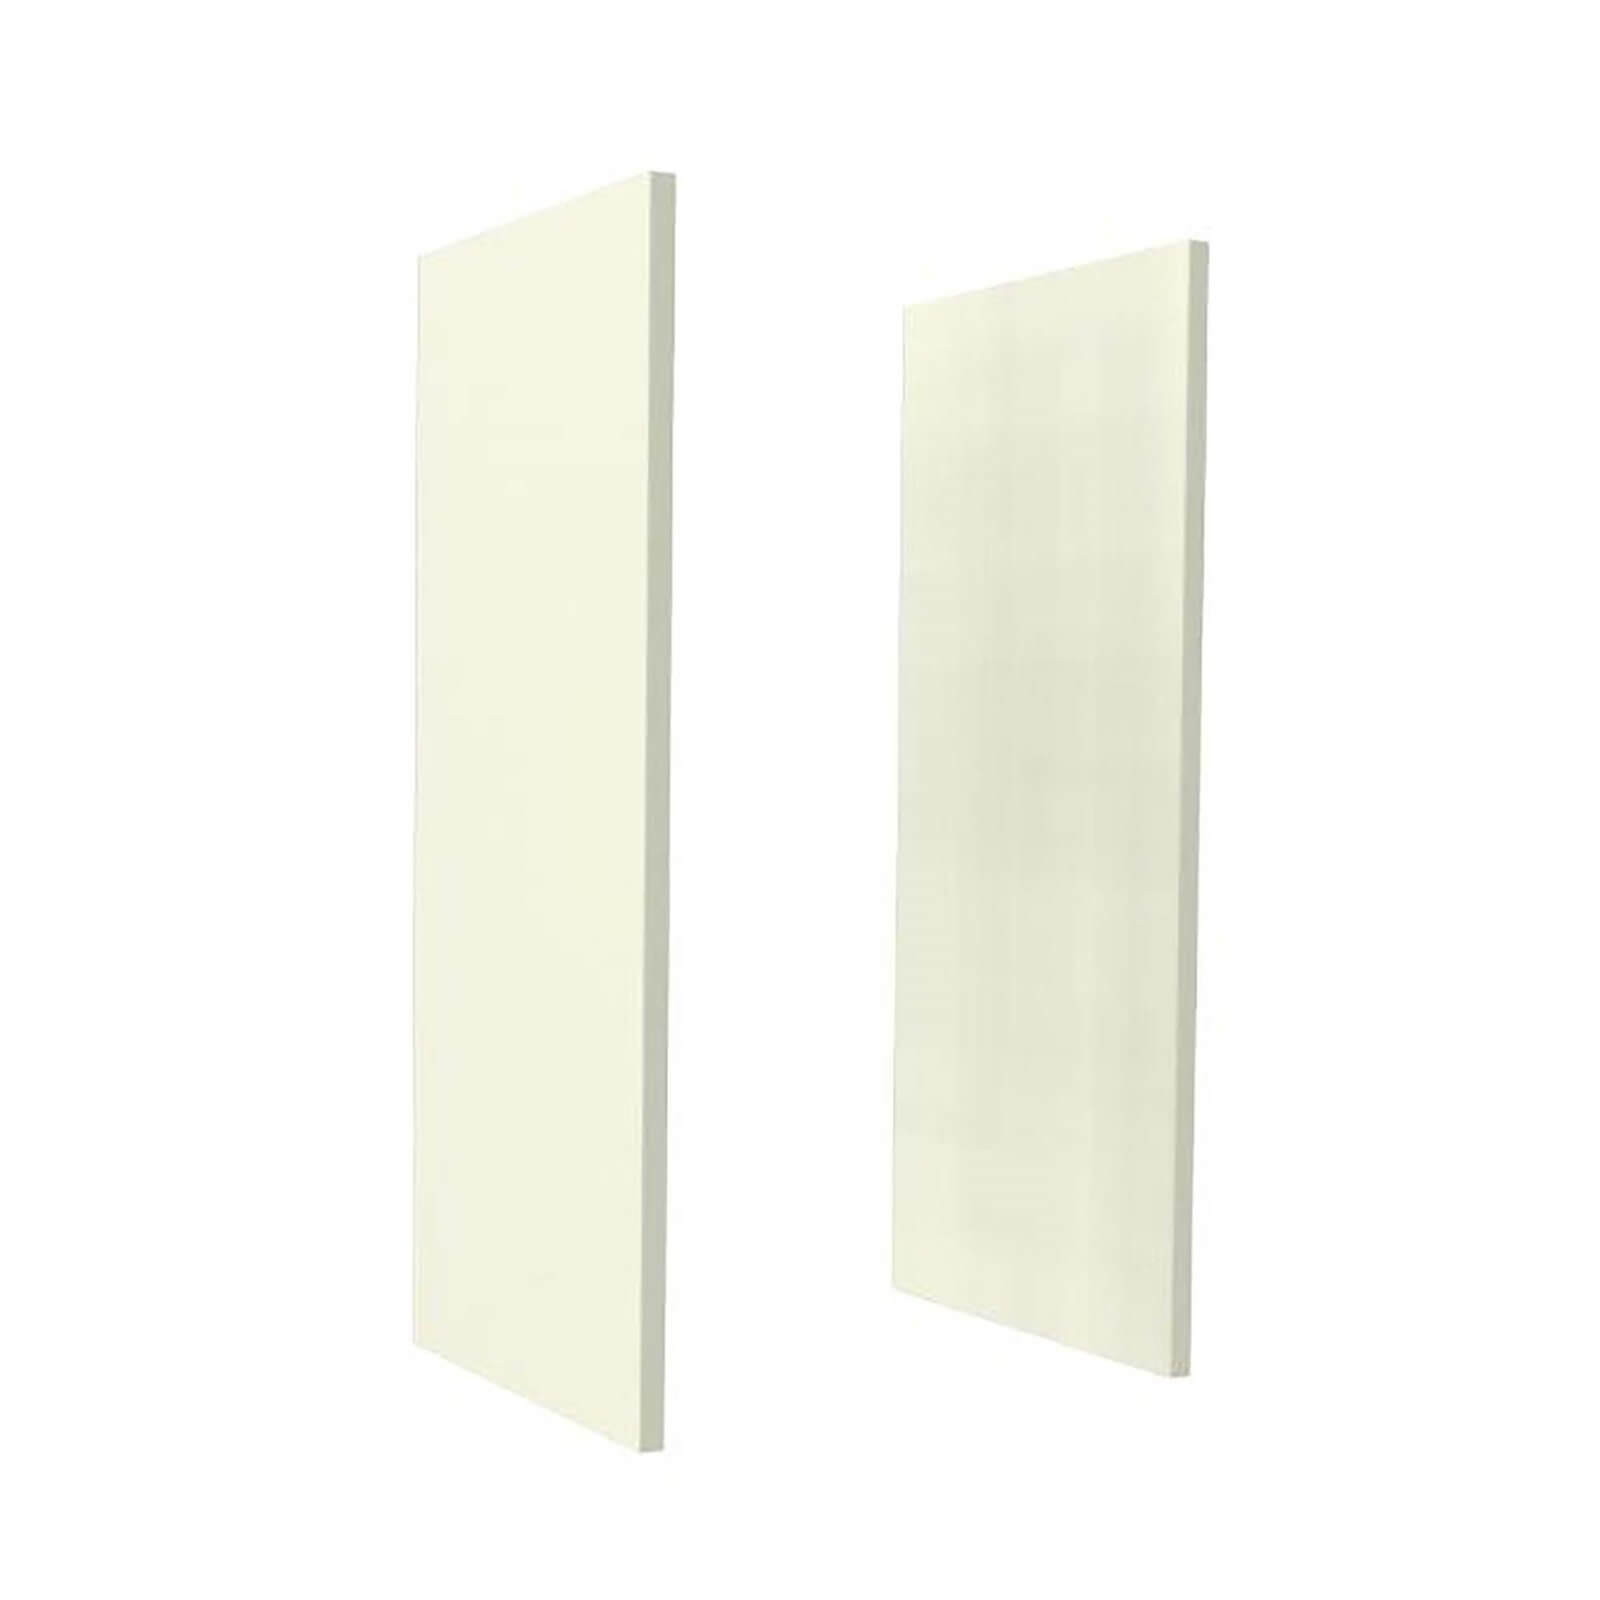 Country Shaker Light Cream Wall Replacement End Panels - Pair